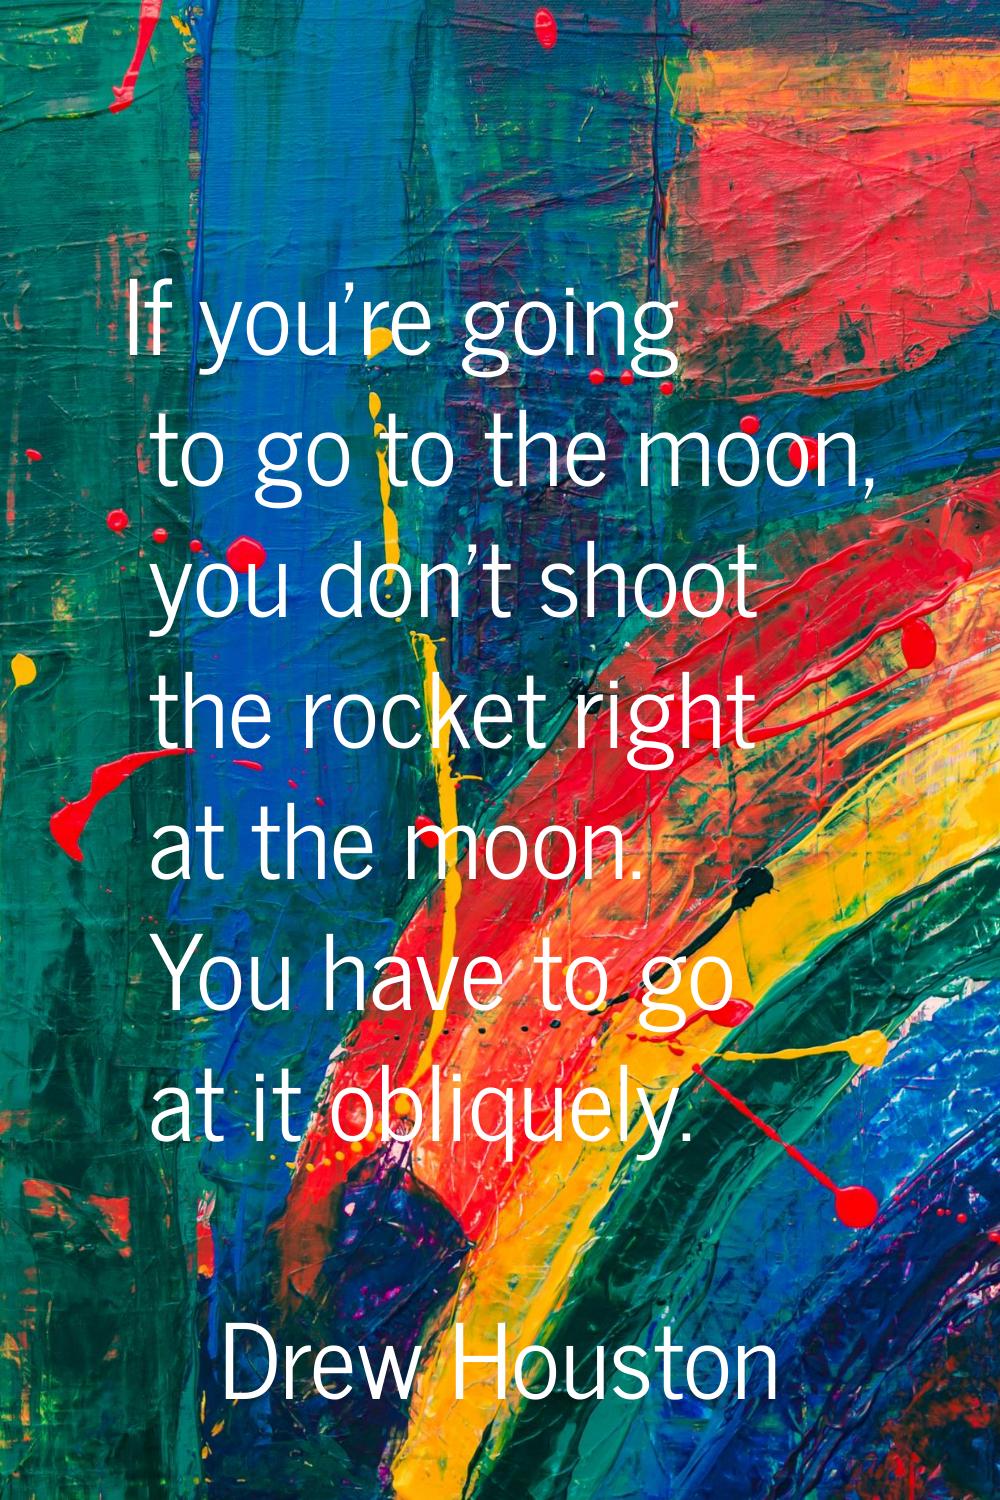 If you're going to go to the moon, you don't shoot the rocket right at the moon. You have to go at 